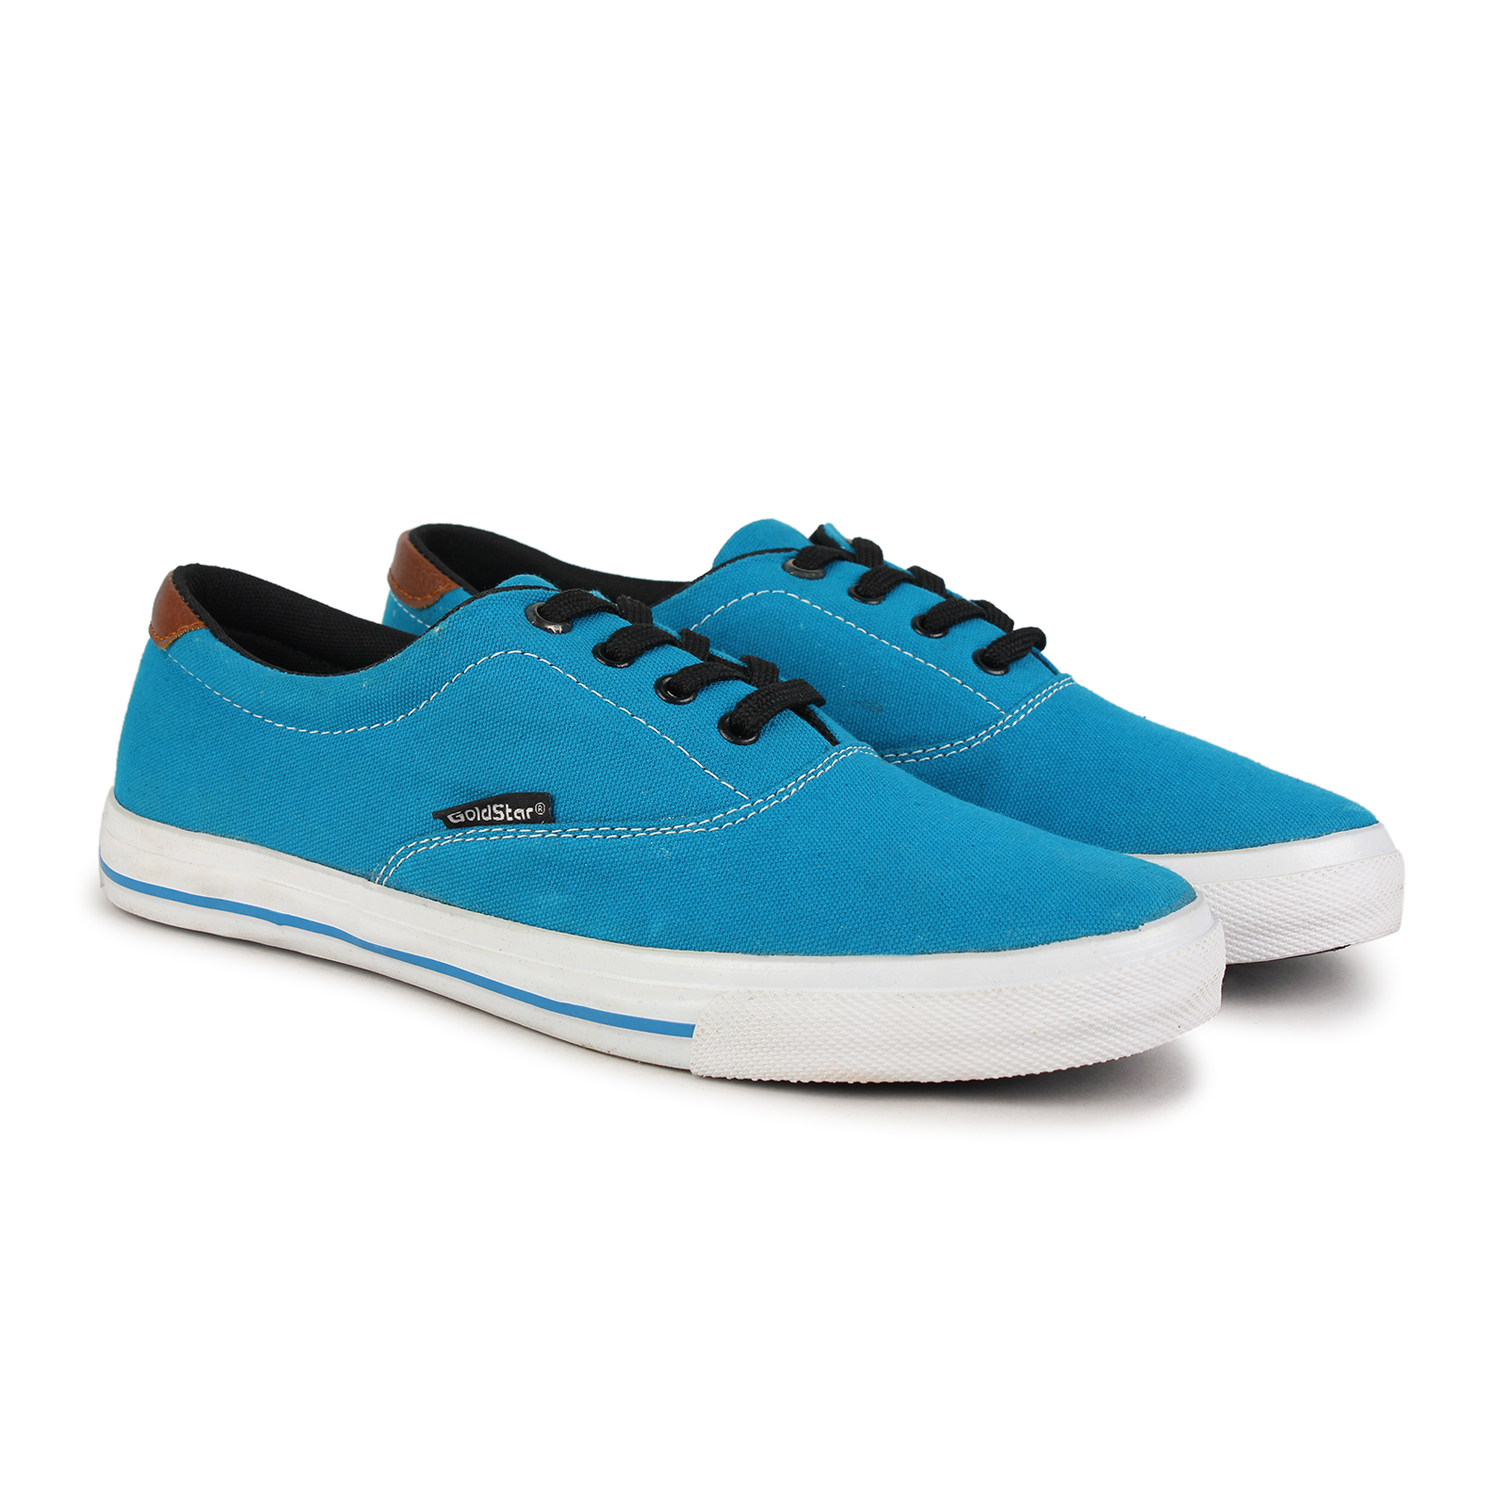 Buy Goldstar Men's Blue Lace-up Sneakers Online @ ₹499 from ShopClues